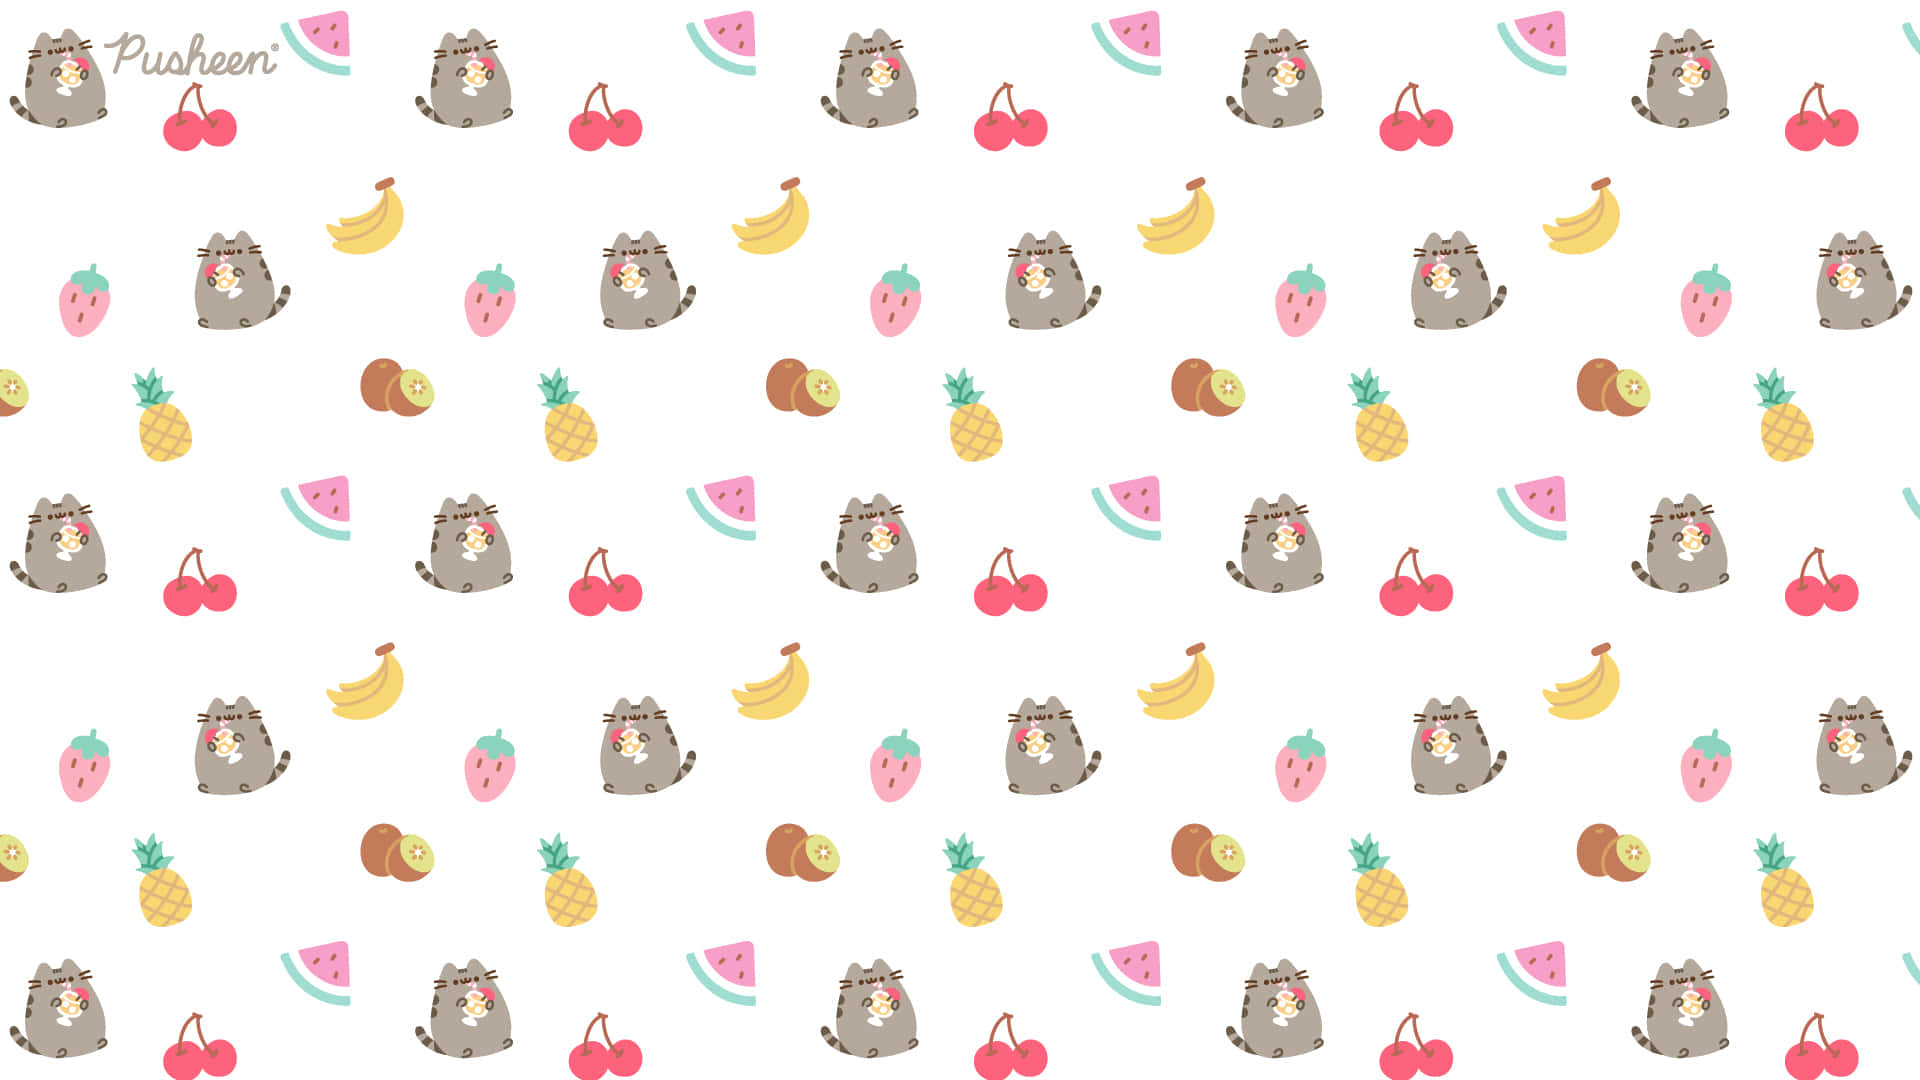 Get your work done on a Pusheen PC Wallpaper